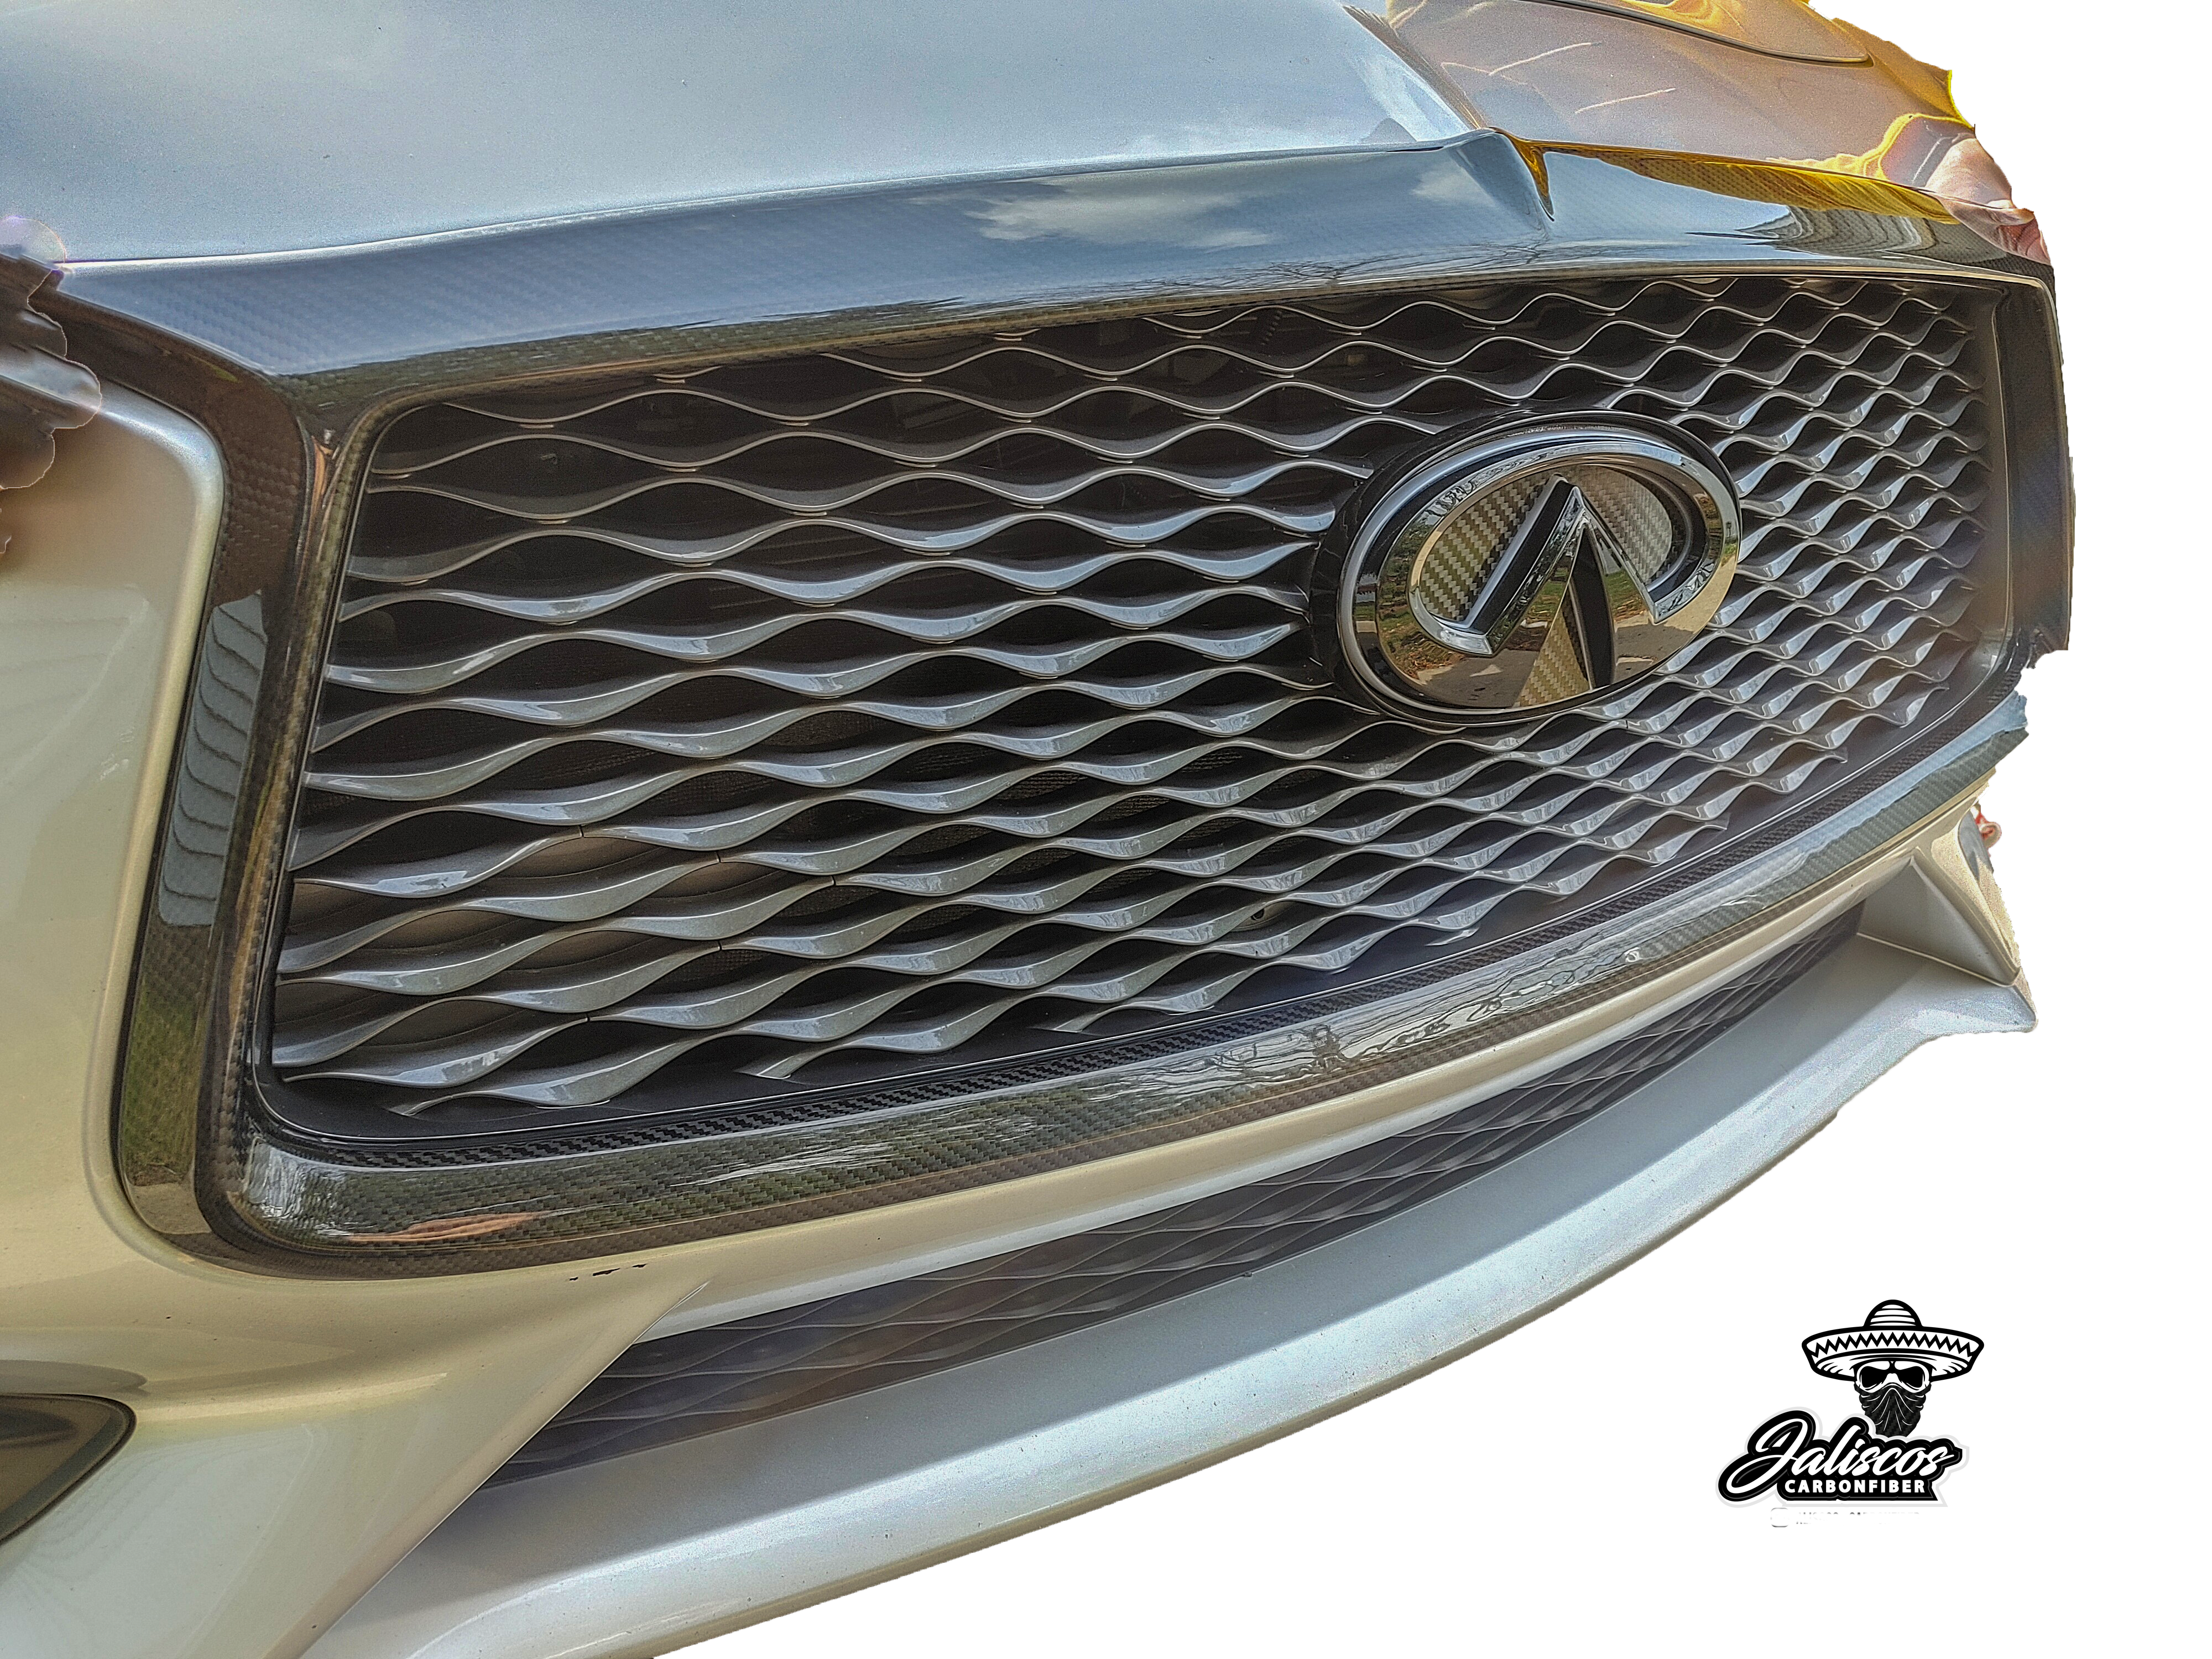 The high-quality weave of Jalisco's Real Carbon Fiber Grill Trim, ready to be applied on the Q50 or Q60 for a custom look.